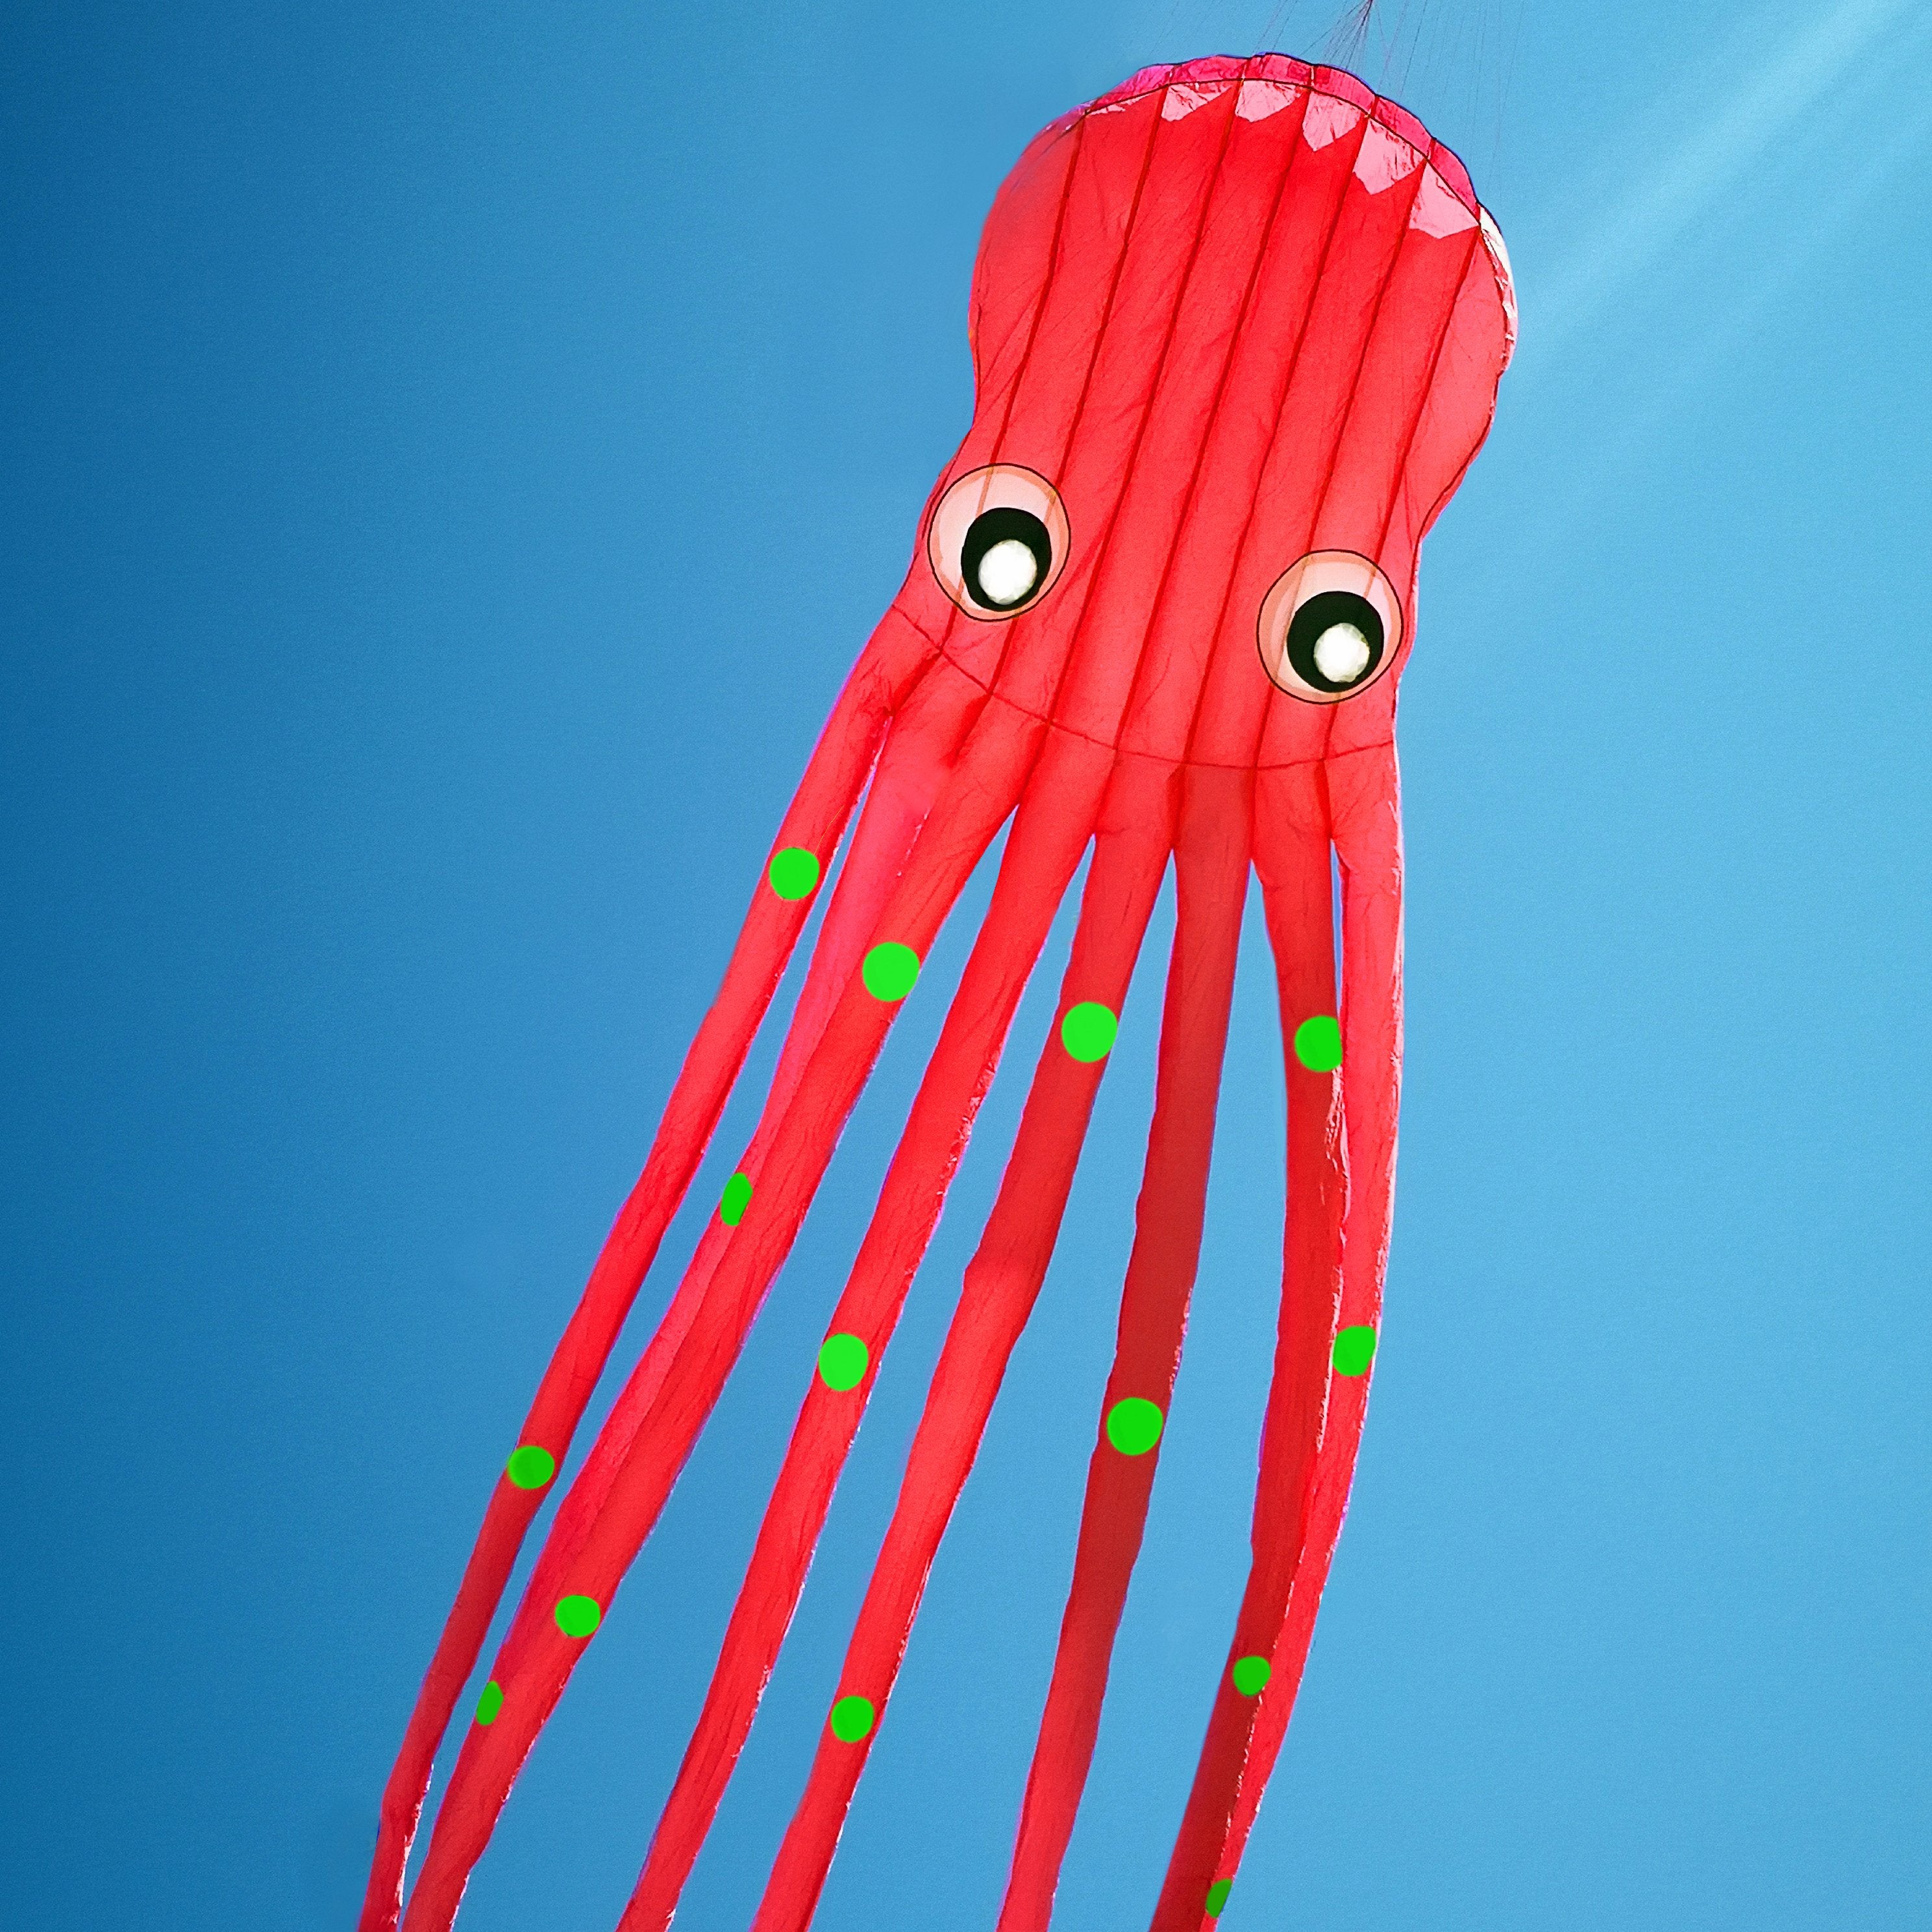 Large 3D 98ft / 30M Tube-Shaped Parafoil Octopus Kite - Red